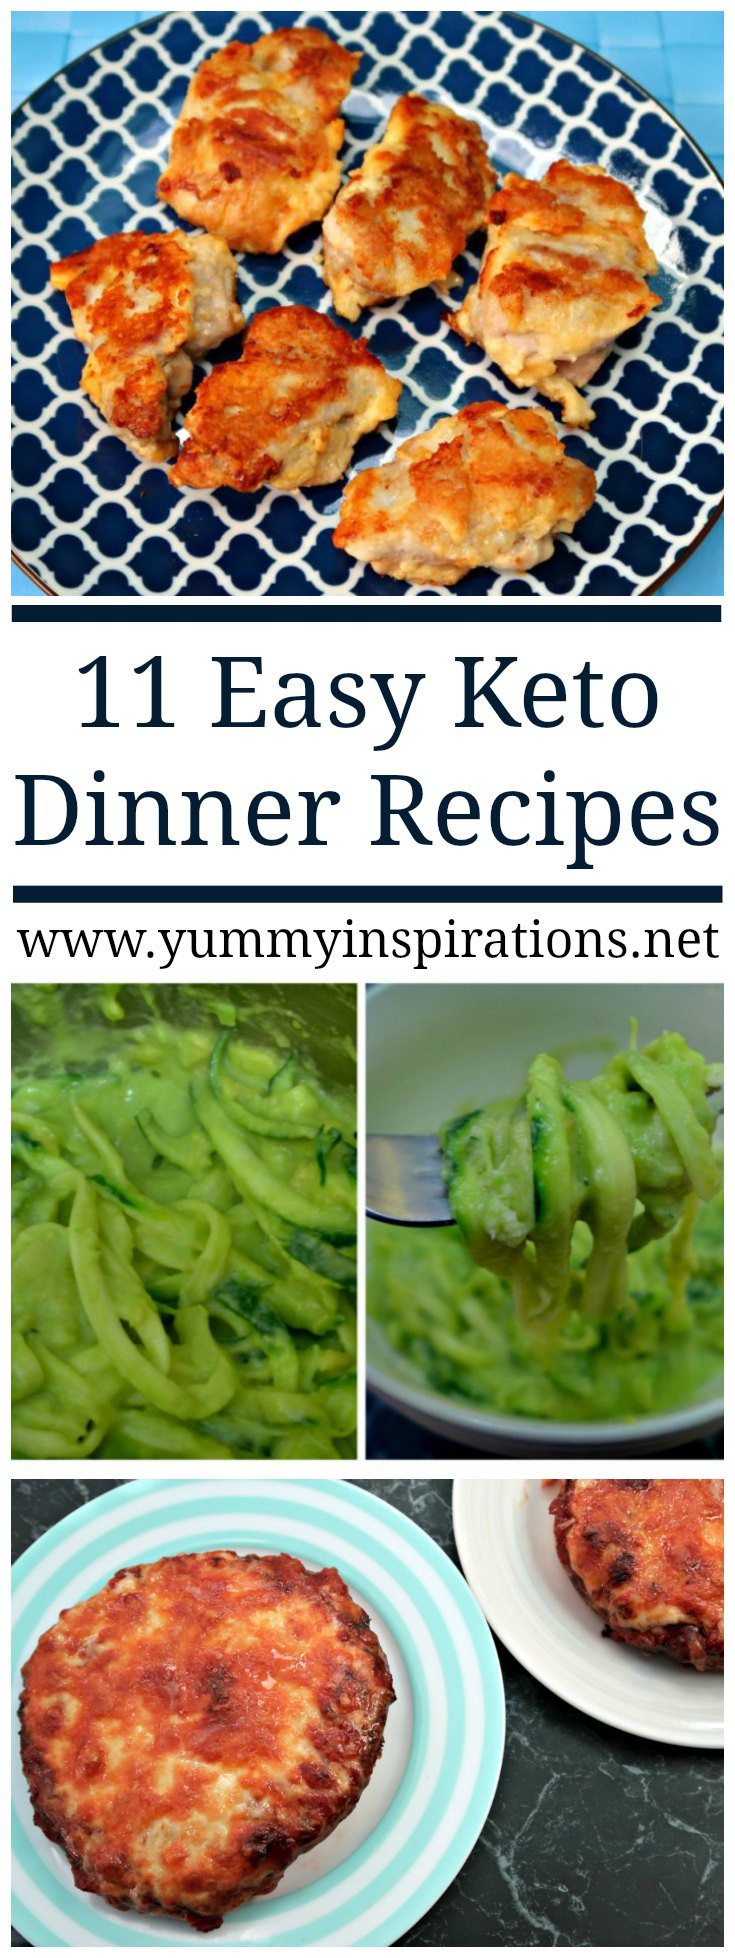 Quick Low Carb Dinners
 11 Easy Keto Dinner Recipes Quick Low Carb Ketogenic